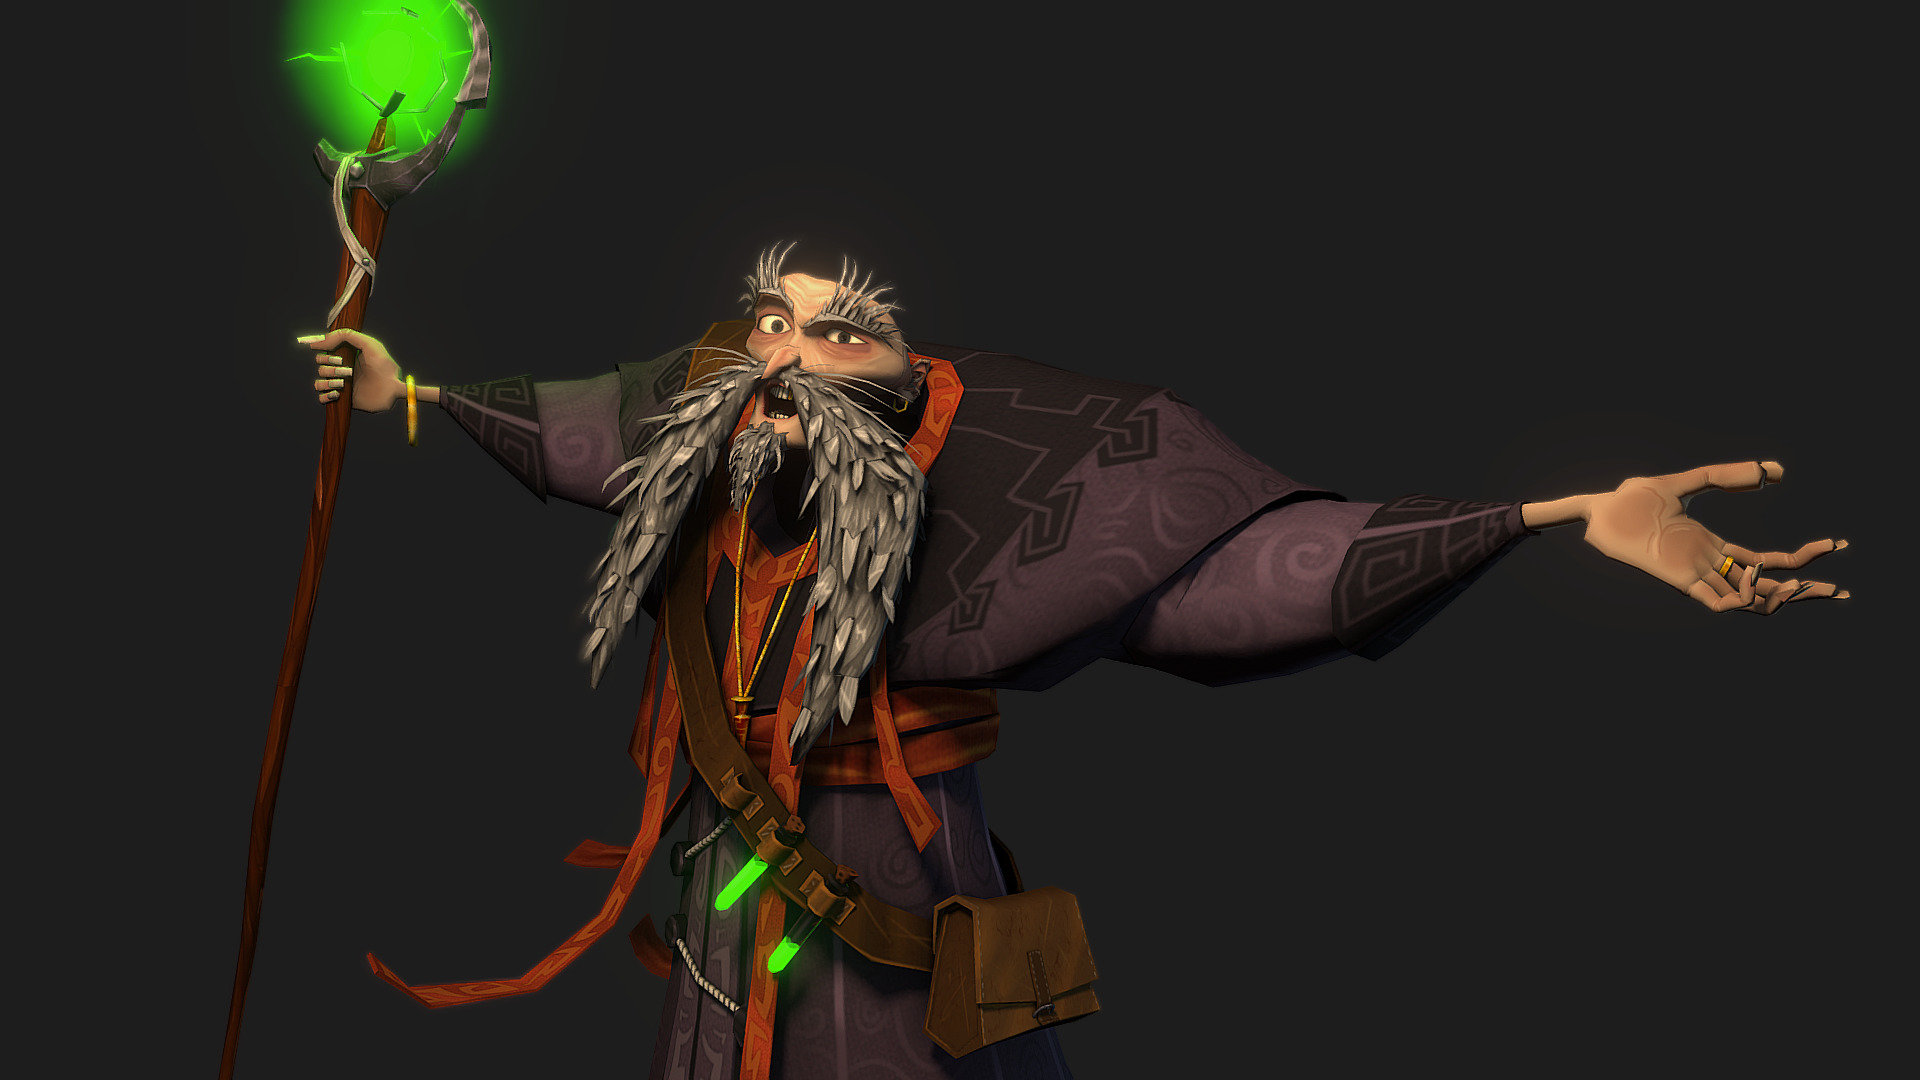 3D concept sorcerer - personal project
Low poly model with 7229 polygons. I used Photoshop for hand panting textures.
There are 3 textures in 2048px with 2 alpha maps for: 
- vials transparency objects
- beard transparency

I skin the model for the final posing and for future projects - Sorcerer - Character modeling - 3D model by carlito69 (charles coureau) (@carlito69) 3d model